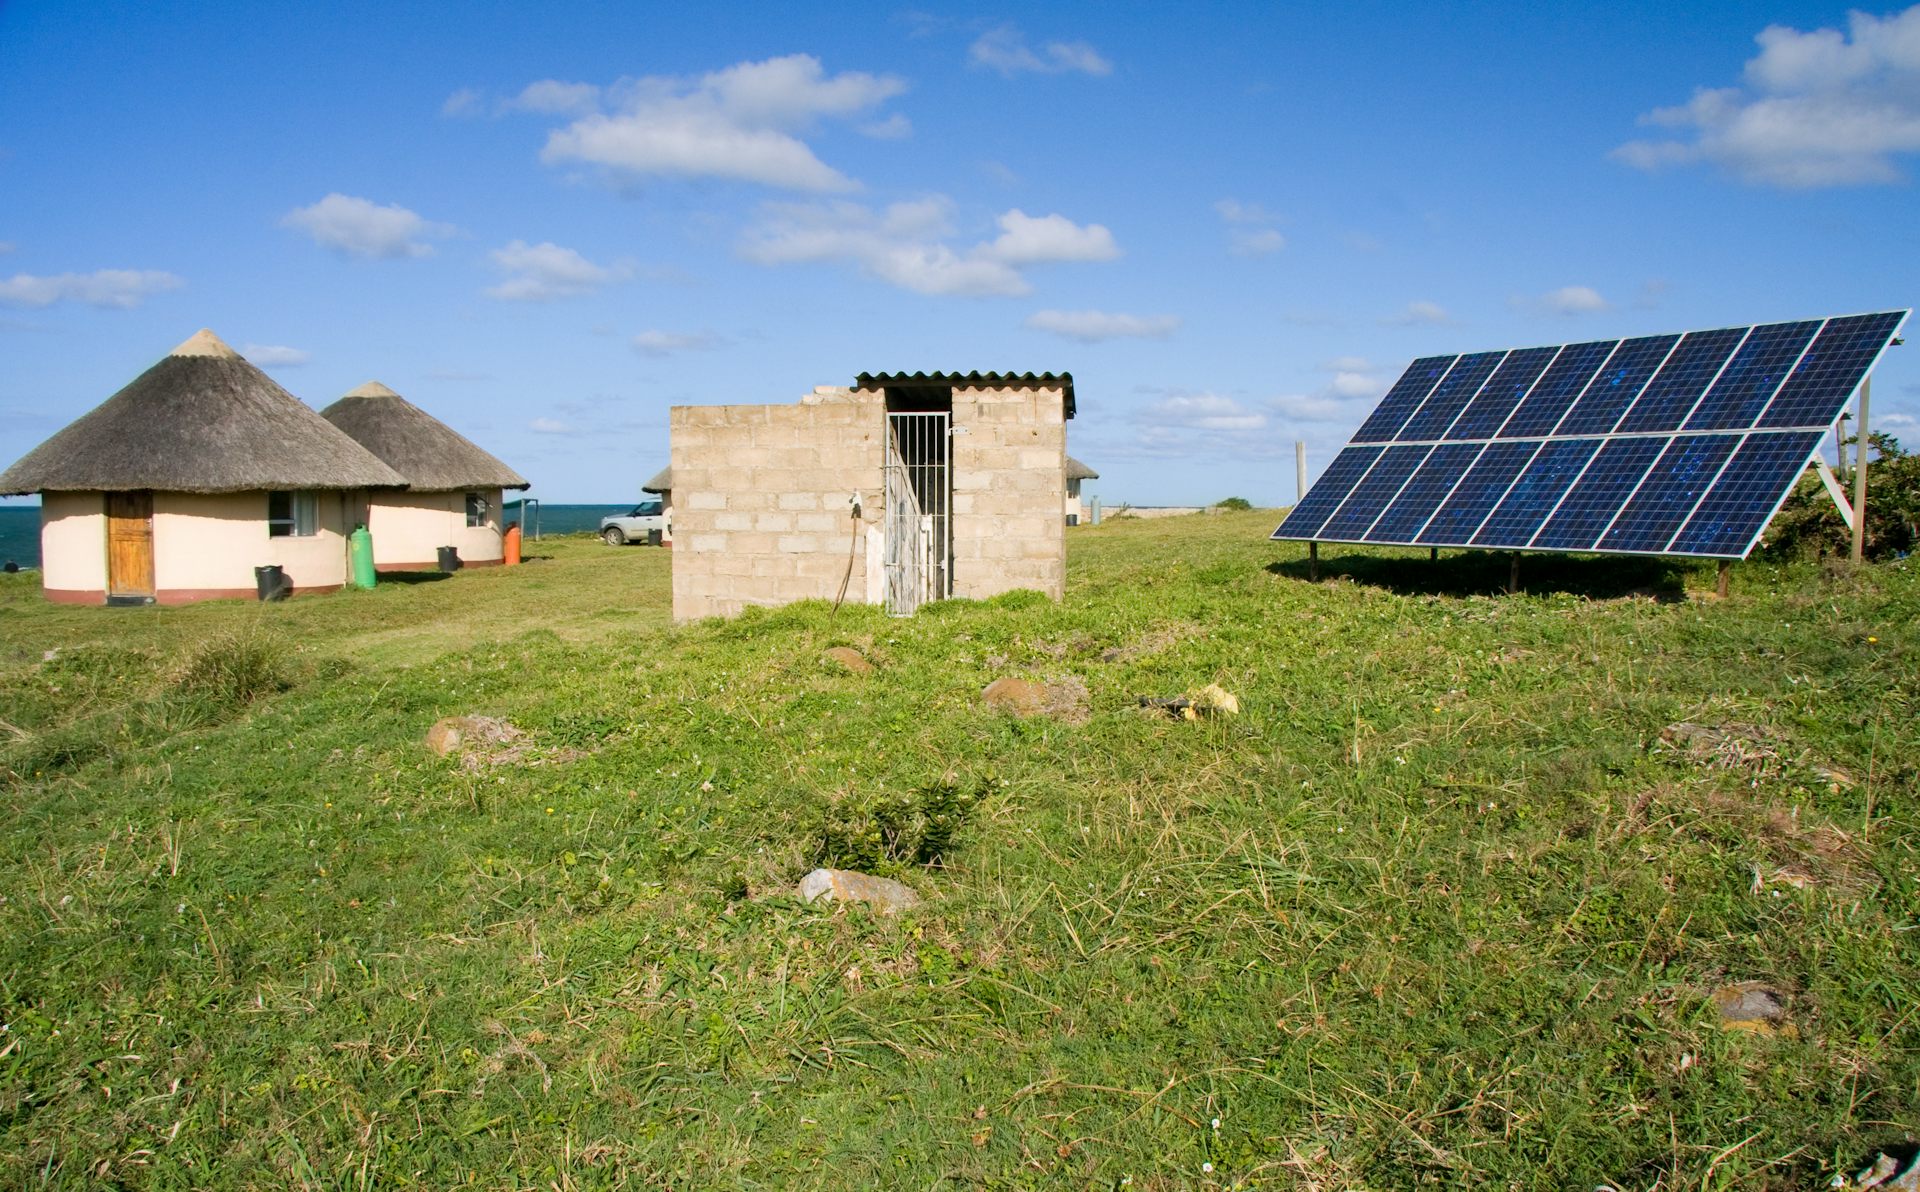 How Technology Could Help Rural South Africa Turn Sunshine into Income